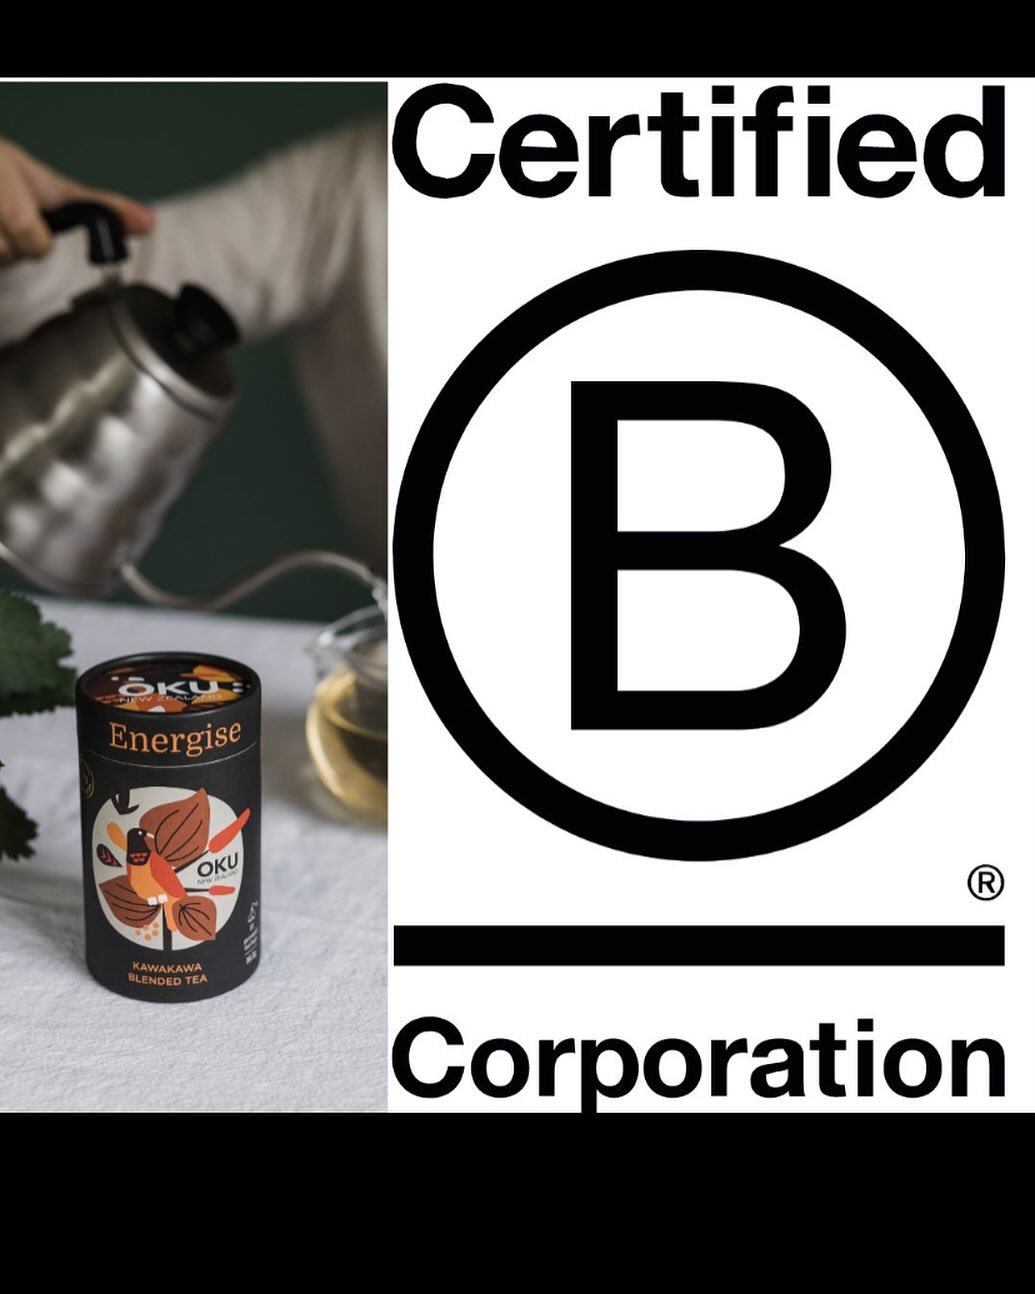 How having Mātauranga Māori principles at the heart of ŌKU helped us to gain B Corp Certification:

We are happy to announce that ŌKU has received confirmation of our B Corp Certification, not an easy process as those of us who have reached the stand